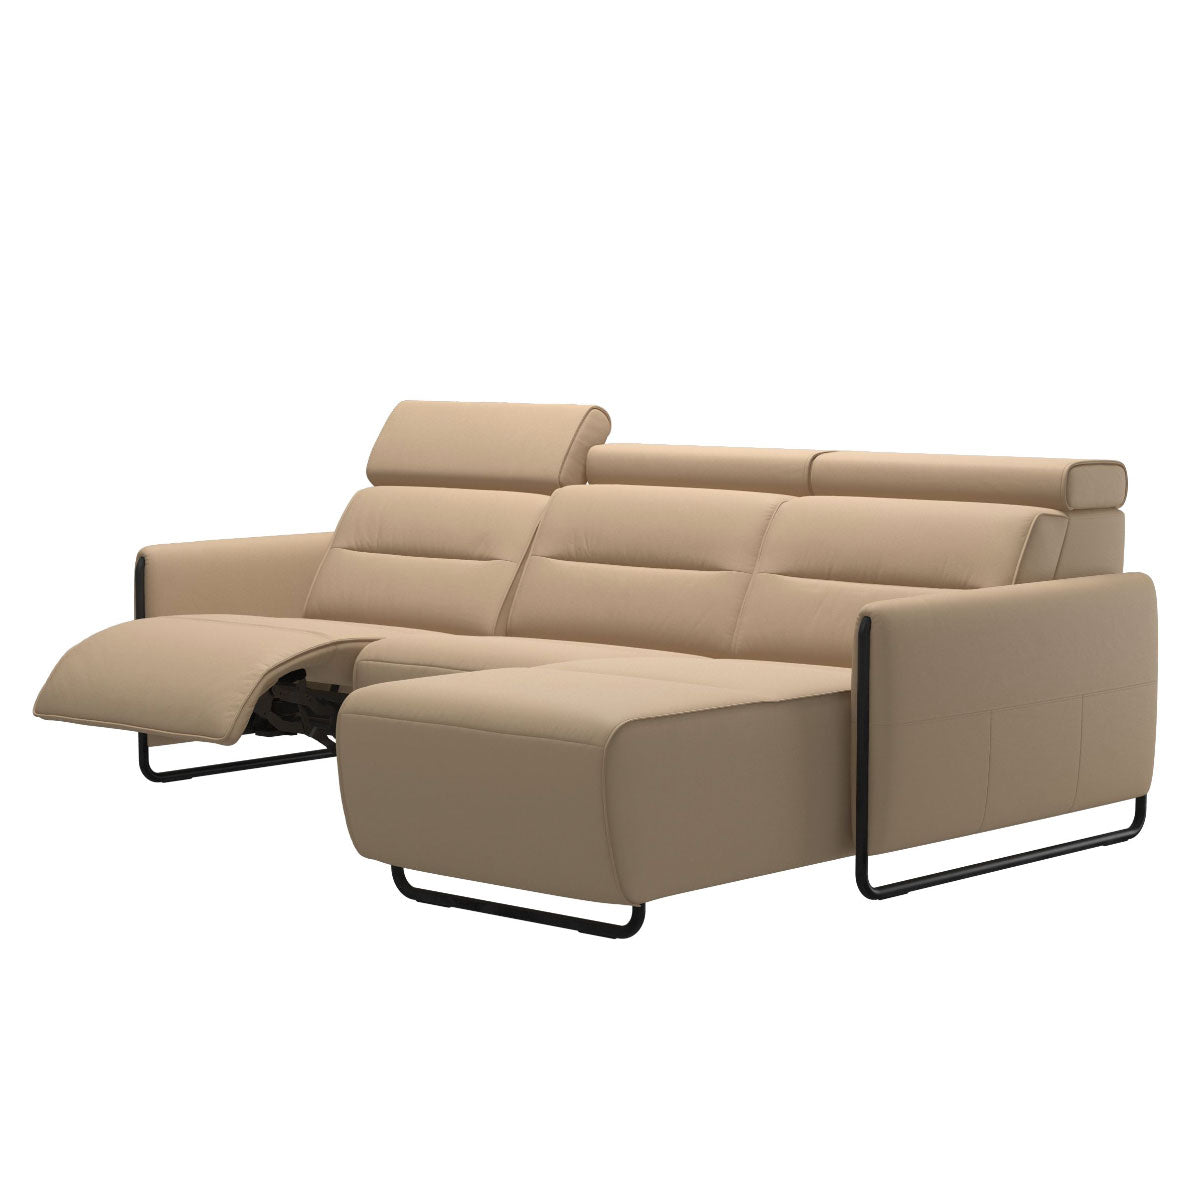 Stressless Emily Two Seater Long Seat Sofa